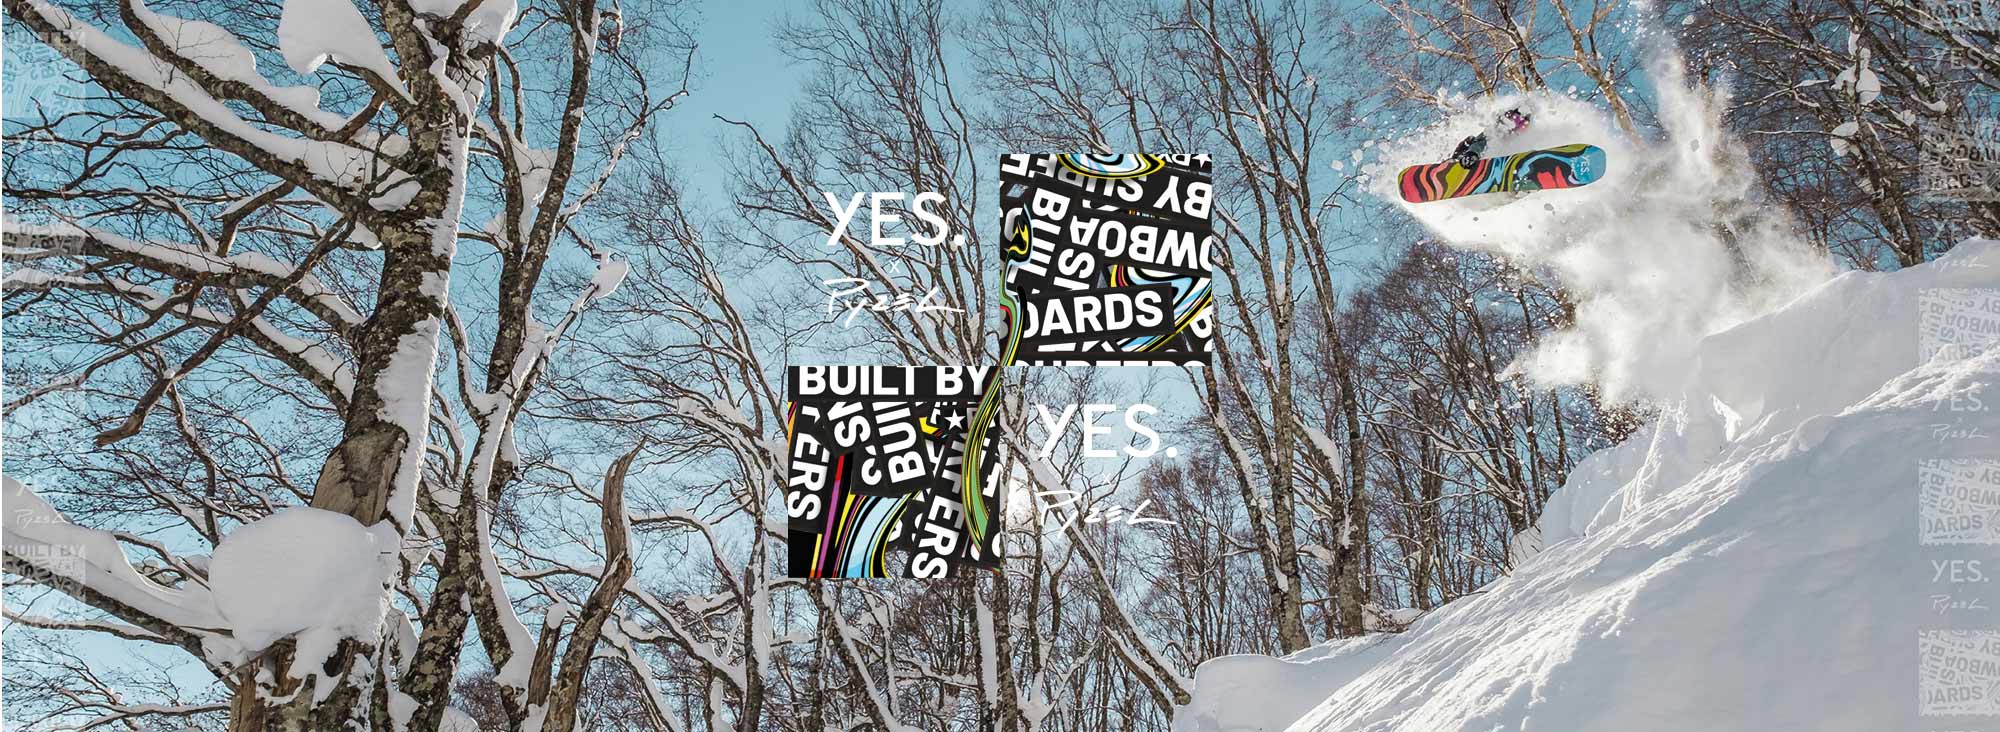 YES. Snowboards